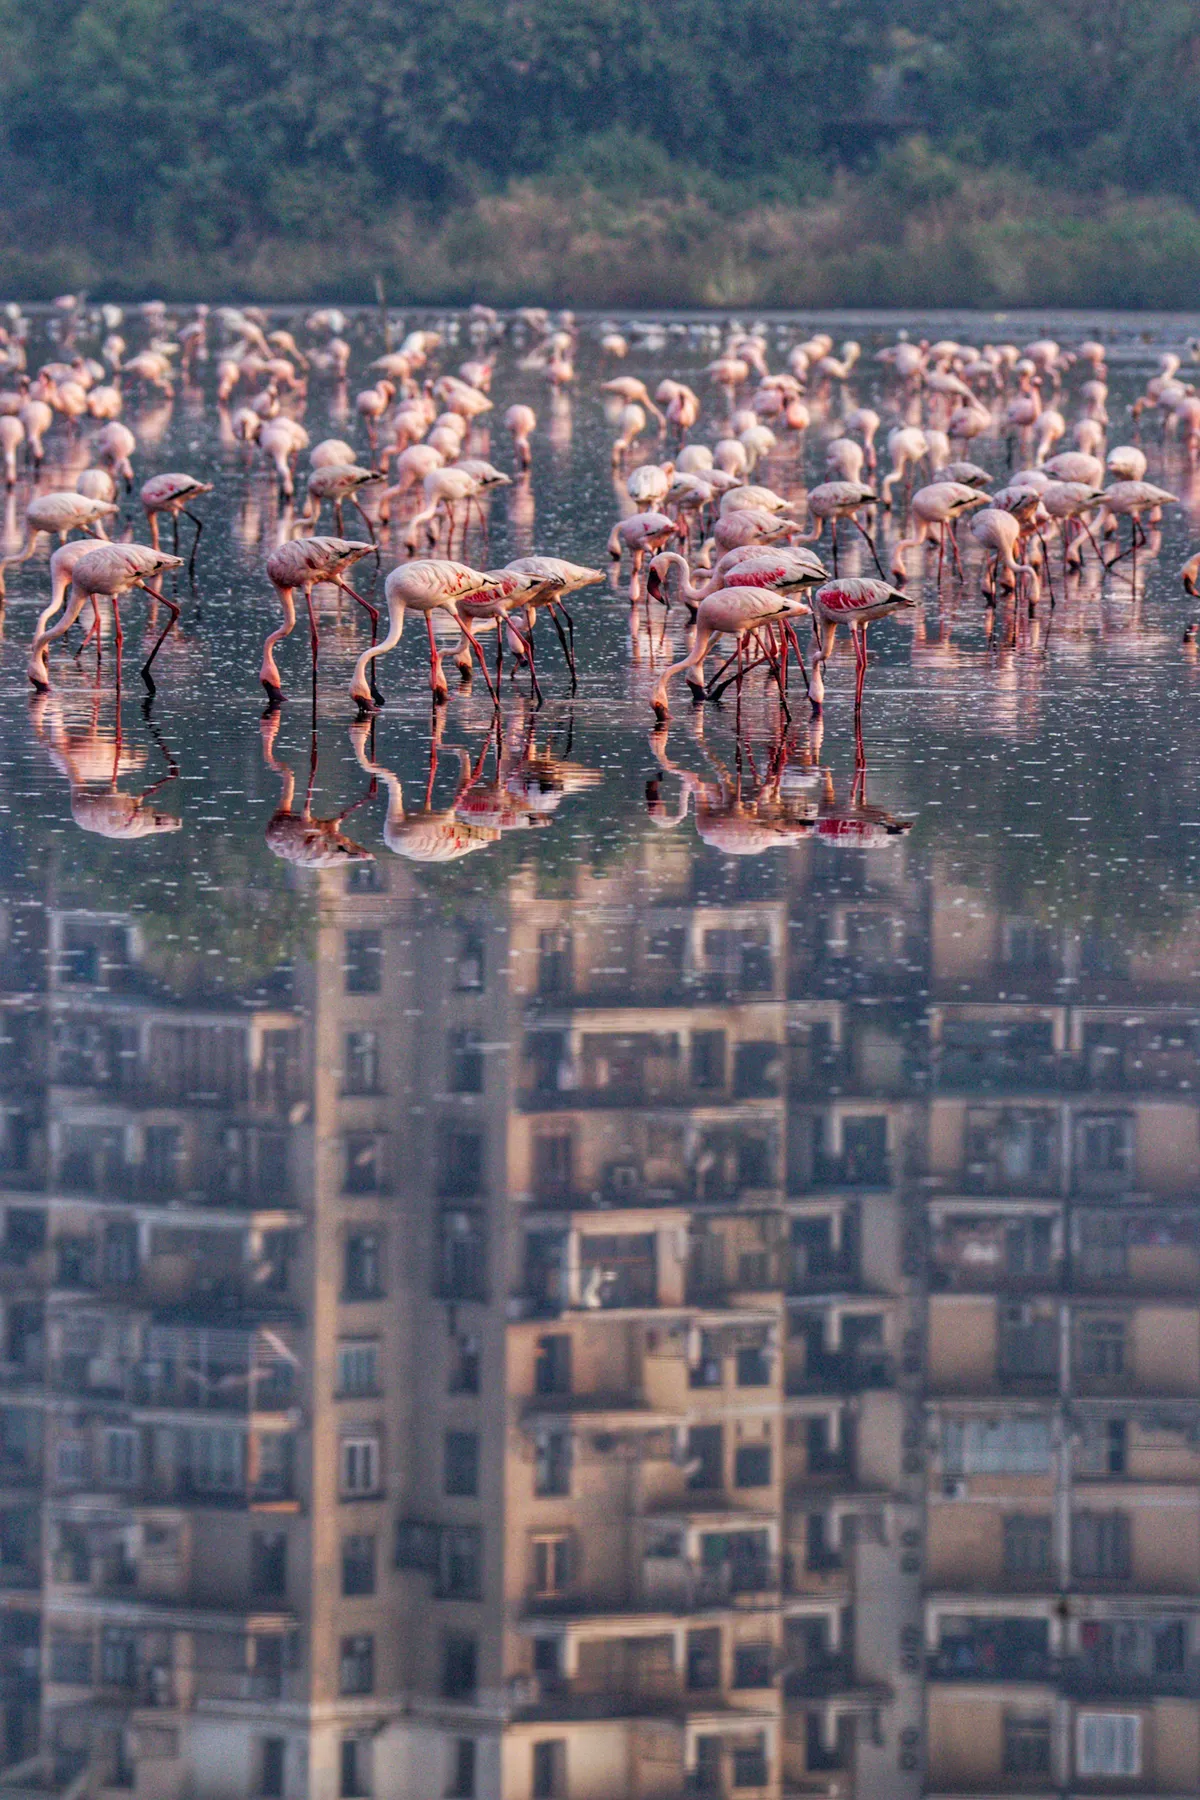 The Real ‘Man Vs Wild’ aka ‘Live and Let Live’: The remaining mangroves in Mumbai are under threat. Here flamingos are seen feeding in a wetland with the reflection of the buildings, a grim testimony of the struggle and loss of habitat these birds are facing. © Vidyasagar Hariharan, India